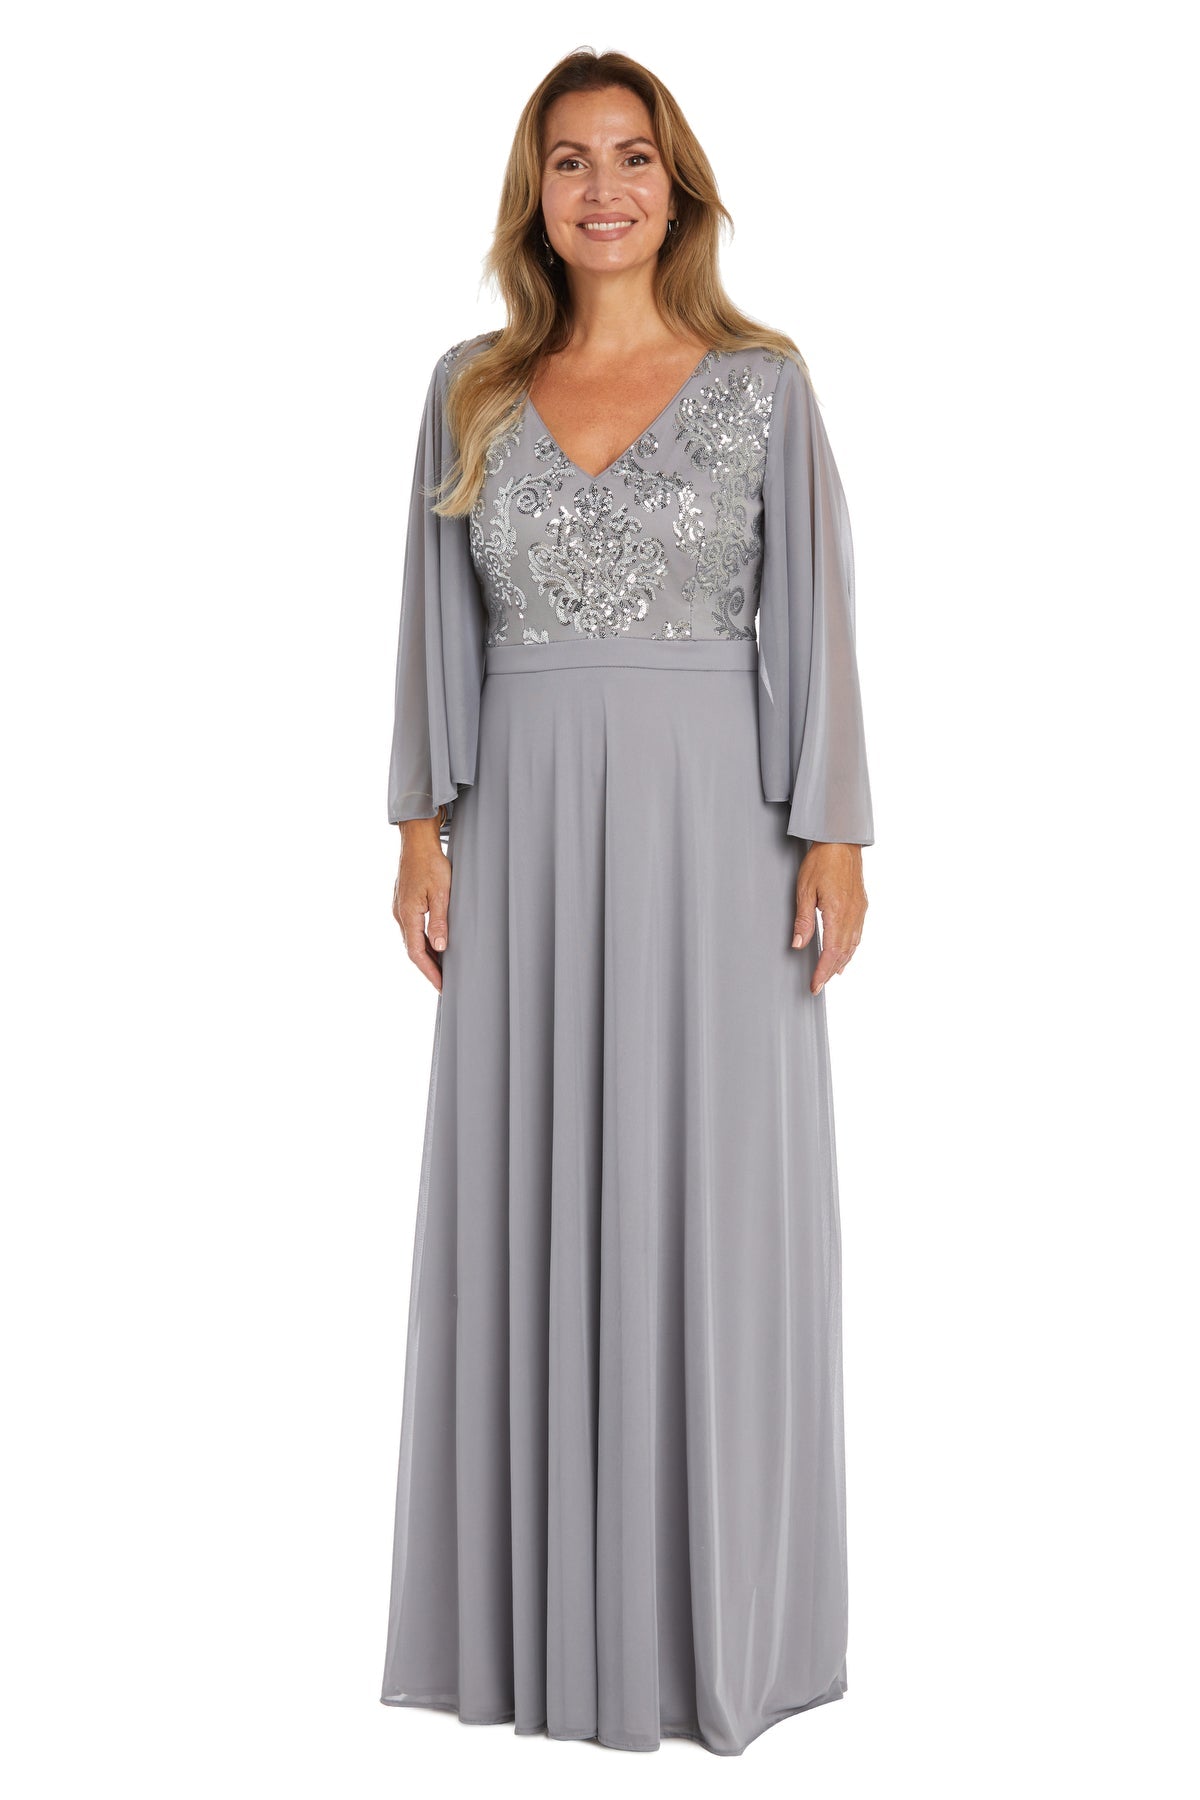 Navy Beaded Sequin Lace Cape Sleeve Evening Gown - Formal Gown